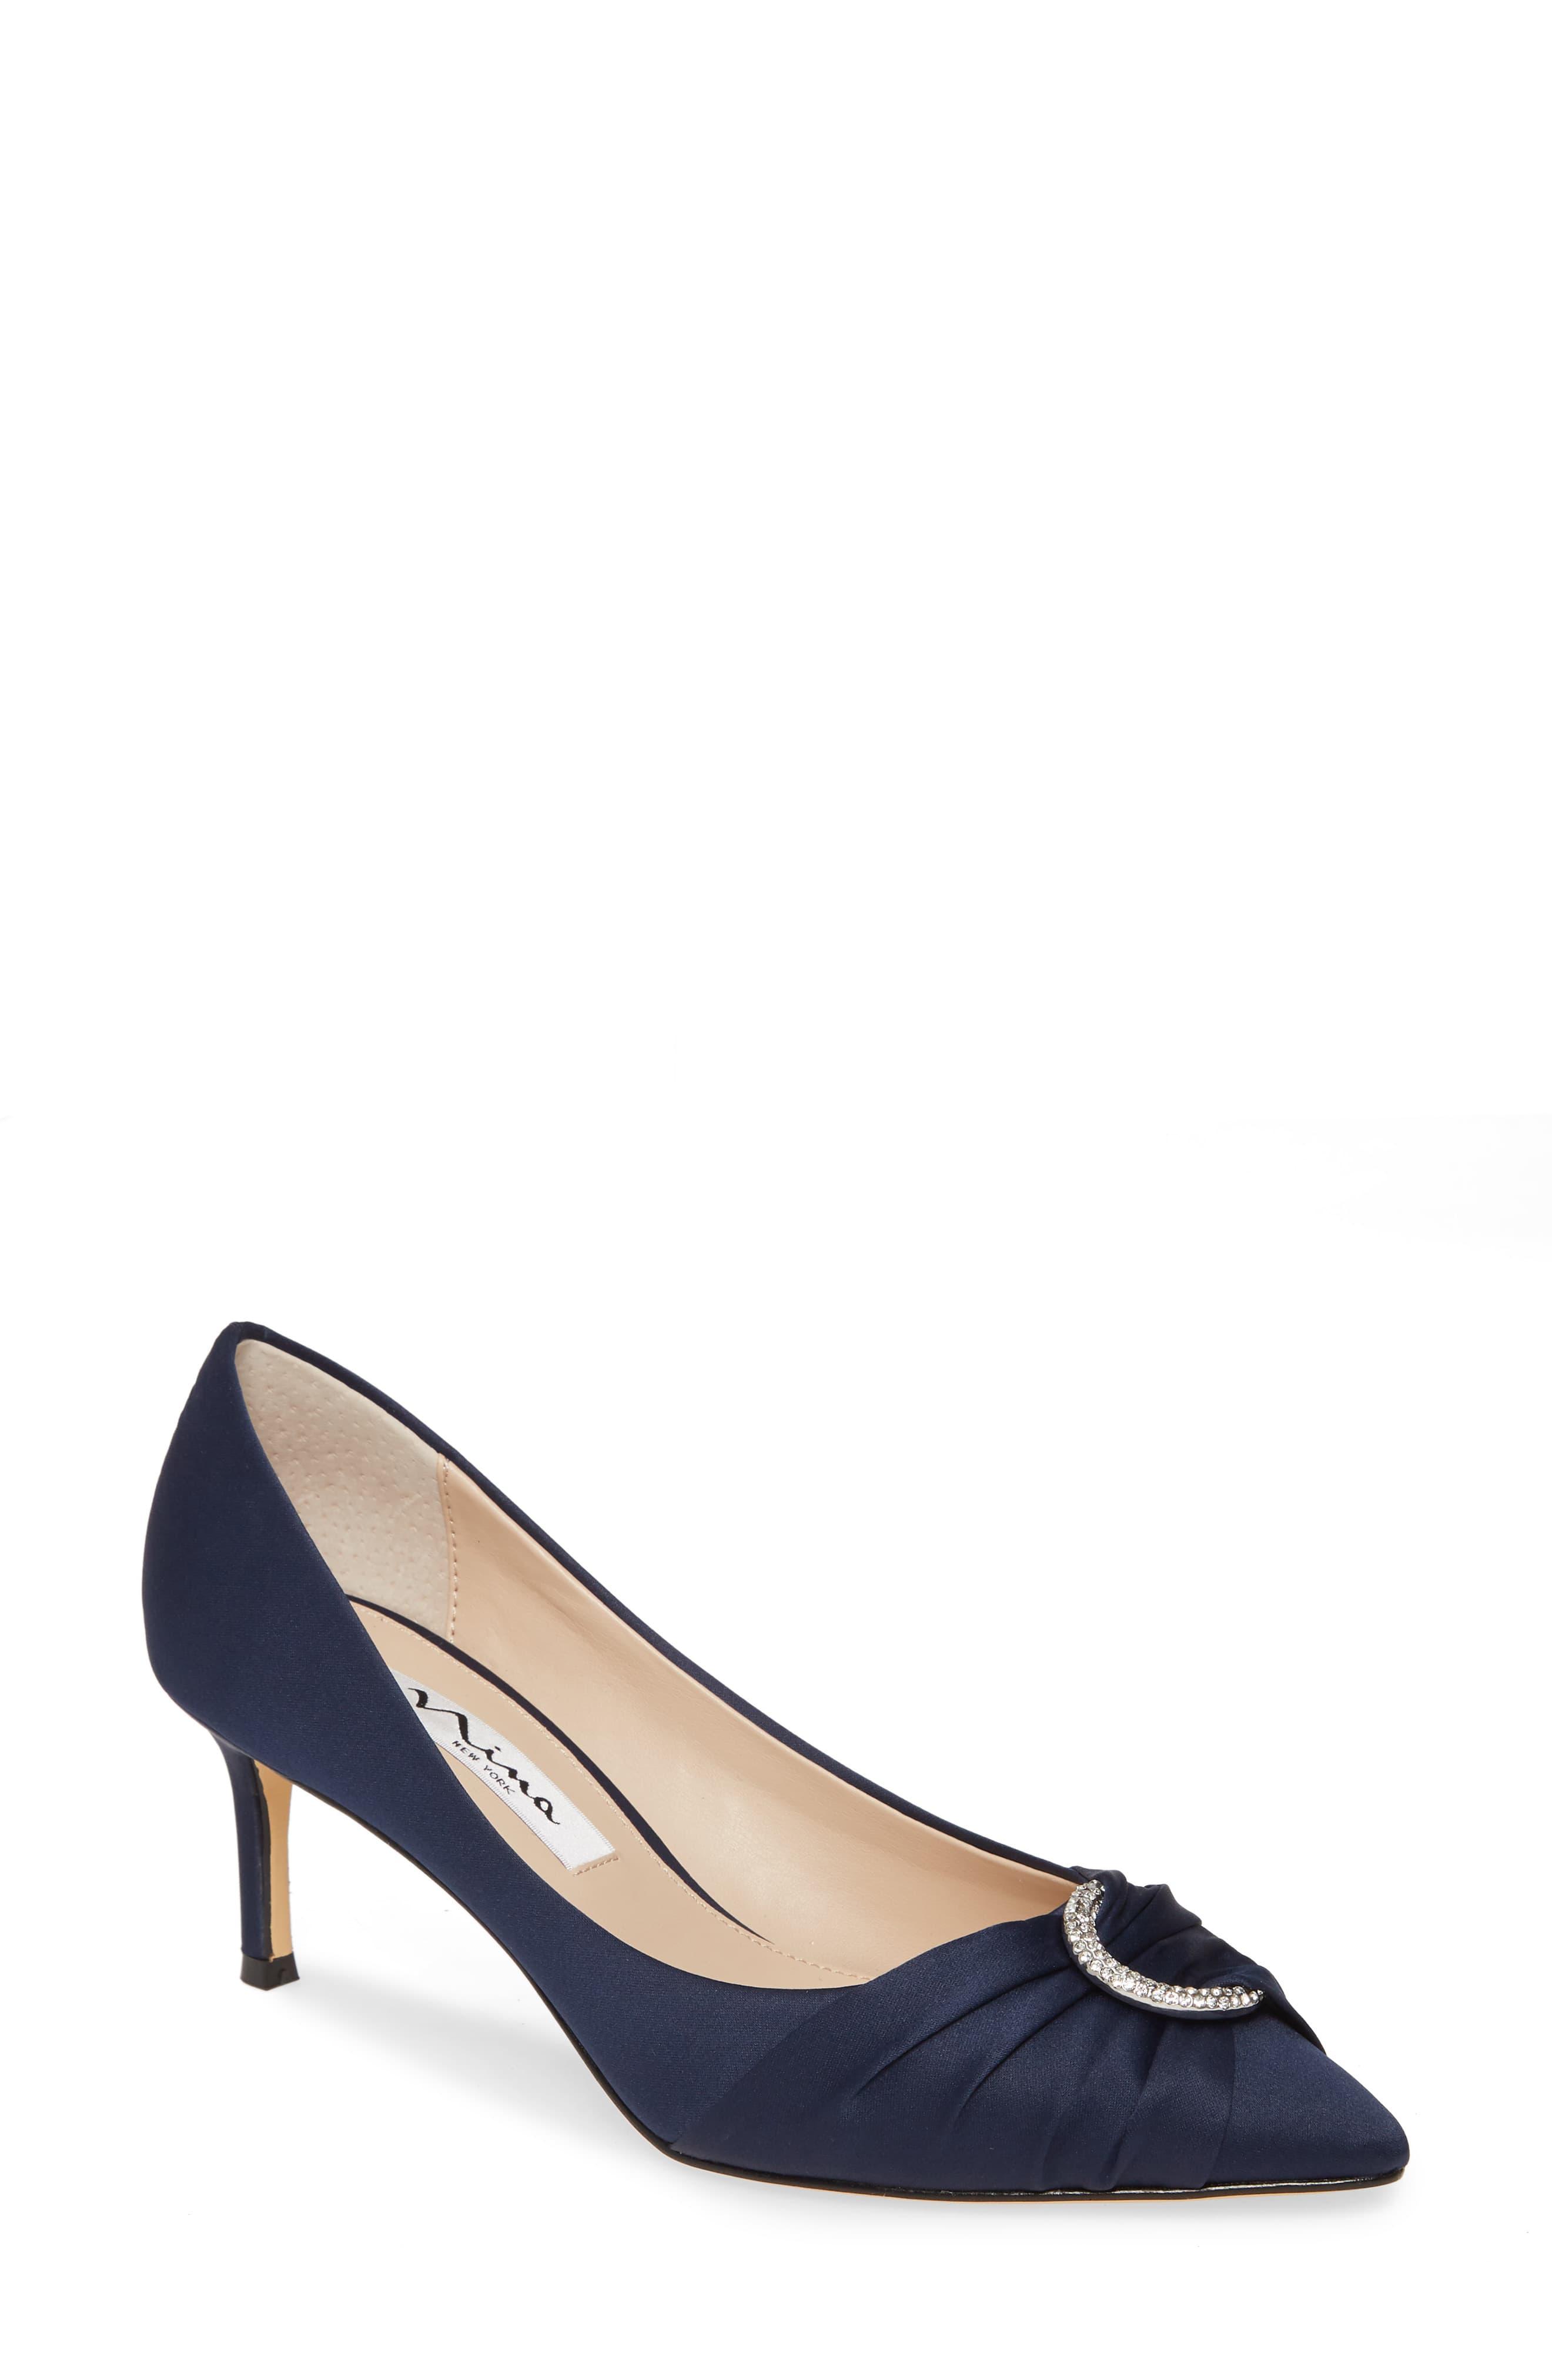 Nina Satin Sue Crystal Embellished Pointed Toe Pump in Blue - Lyst